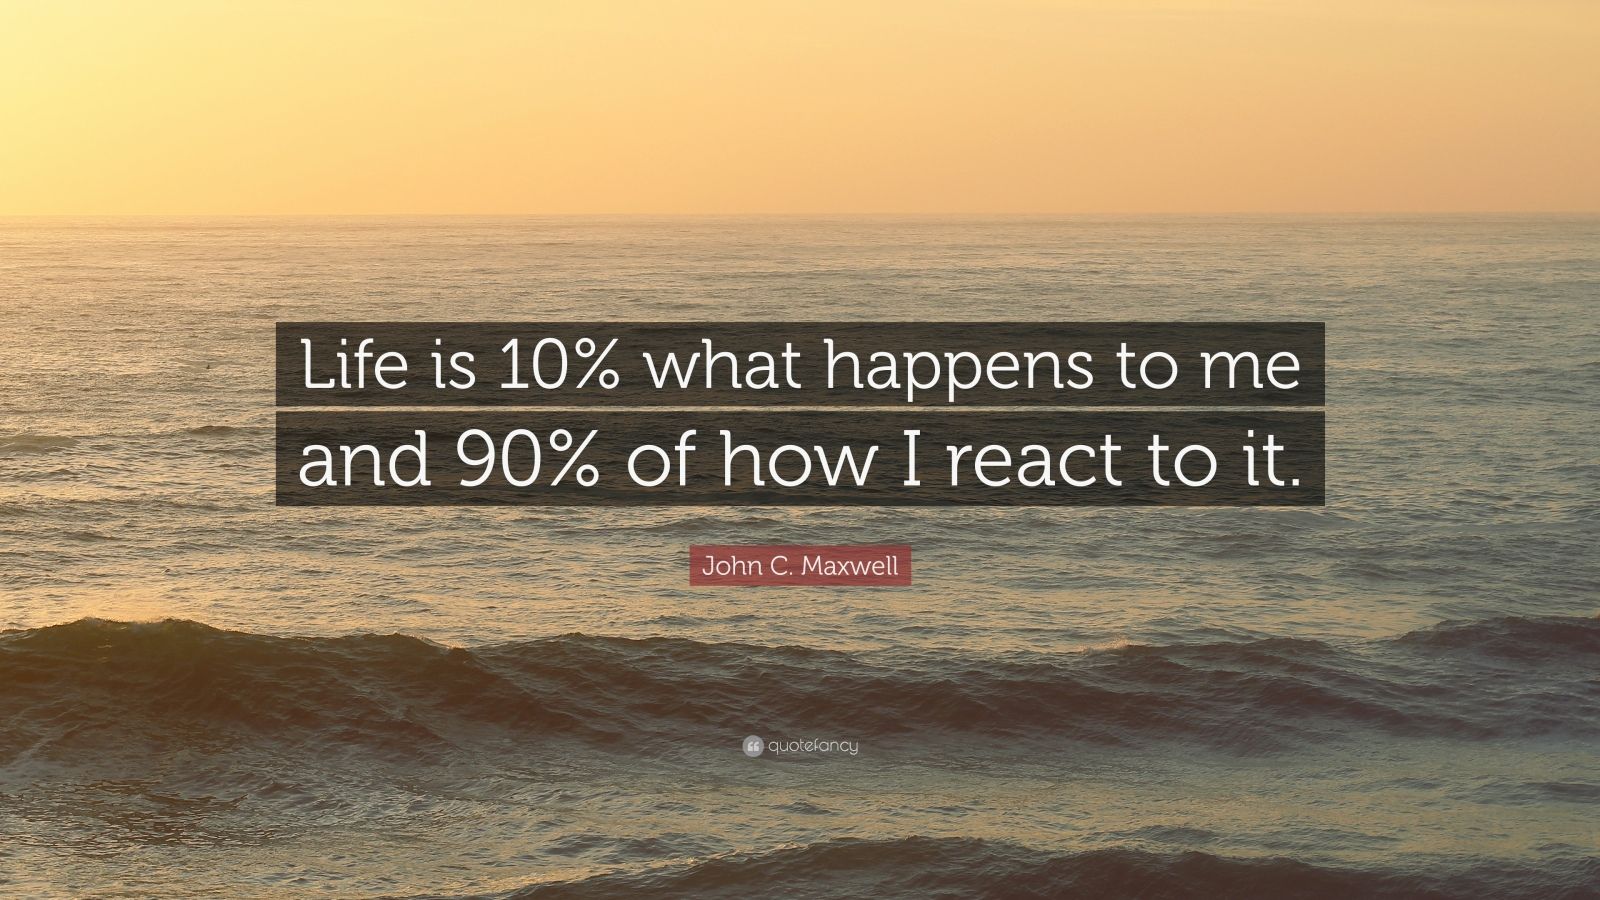 life is 10 what happens and 90 how you react to it quote first found